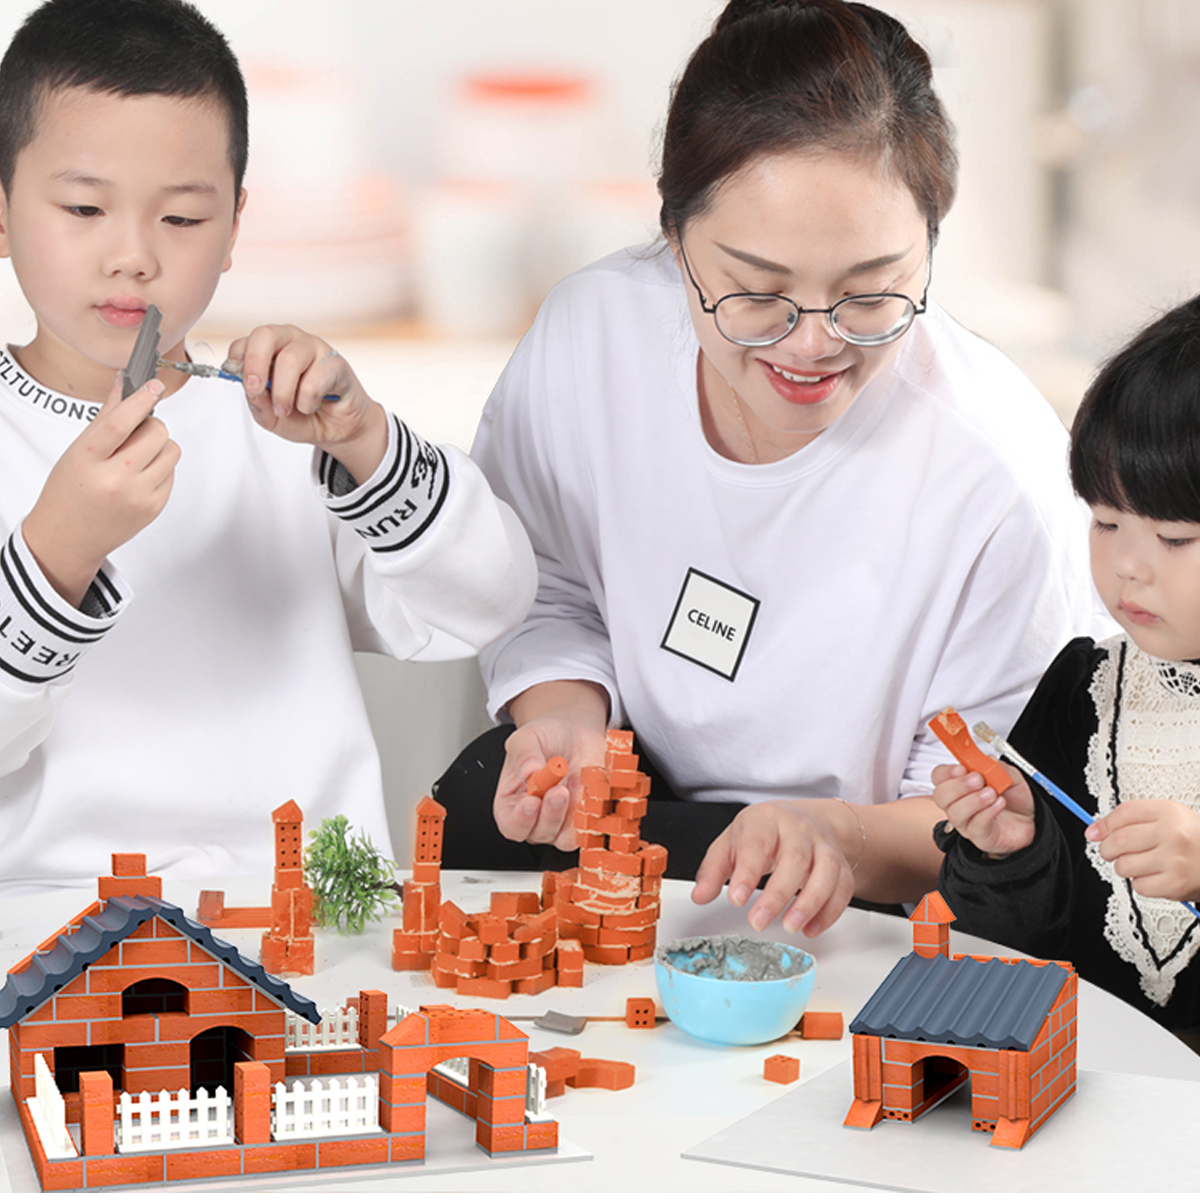 Mini Real House Building Kit STEM Learning Toys Educational Brick Construction Engineering Set 376 Pcs Displayable House Model Gift for Kids and Adult